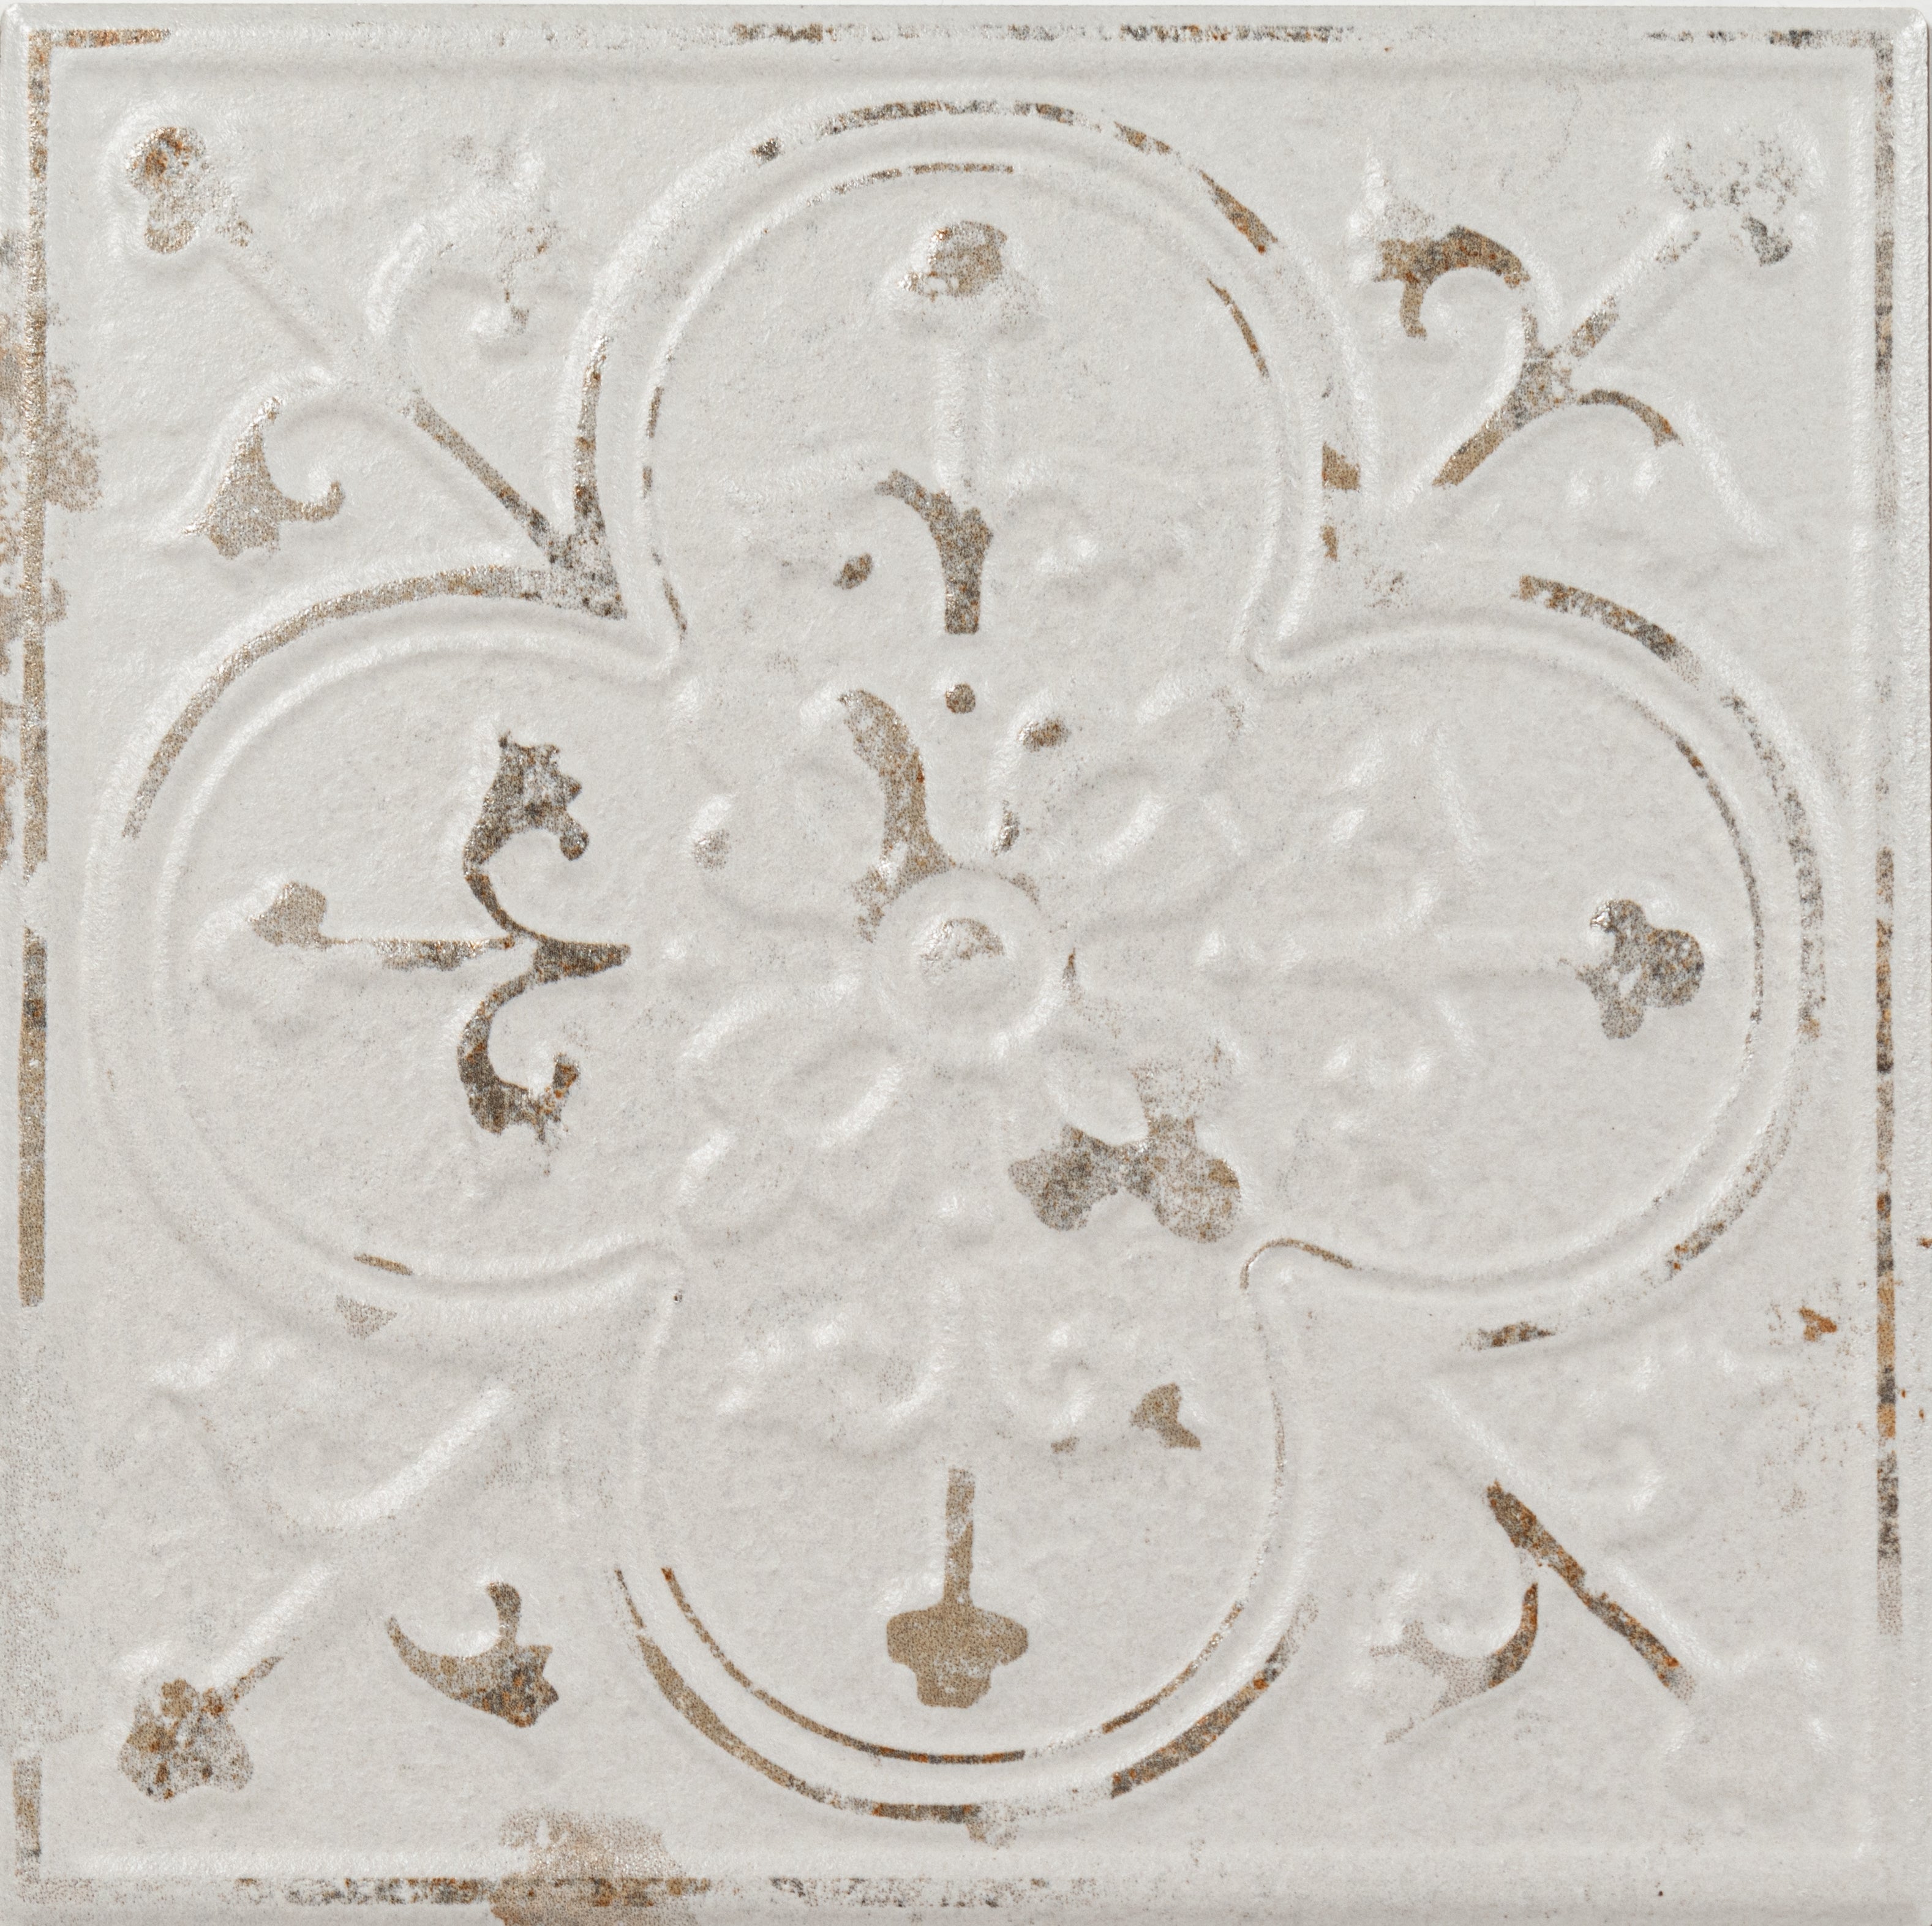 Antiquity 8x8 White Embossed Pattern Tile